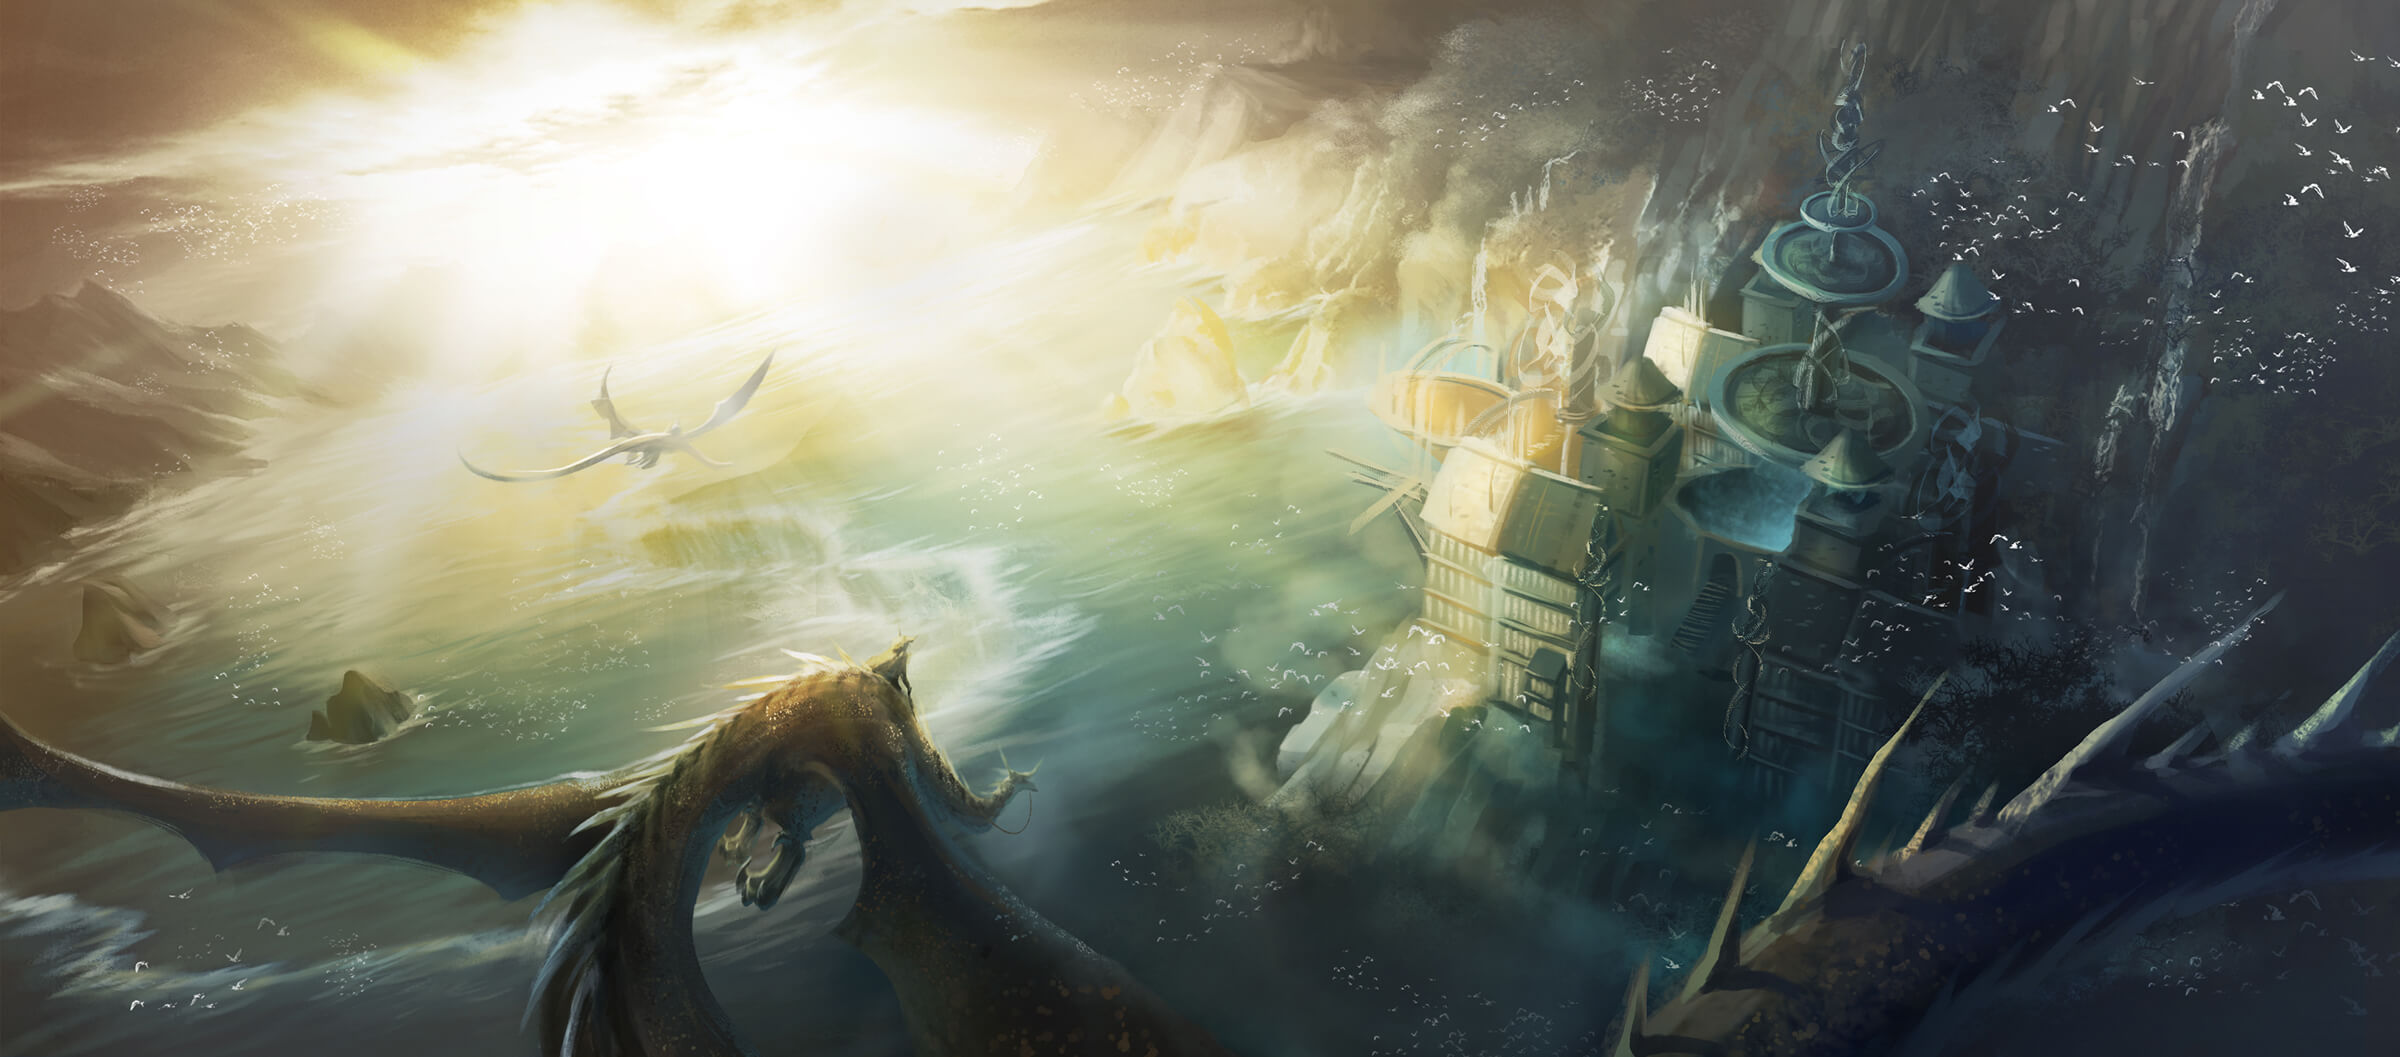 Dragons and their riders fly above a mystical castle on a rocky shore. A diffuse sun lights the scene from a distance.